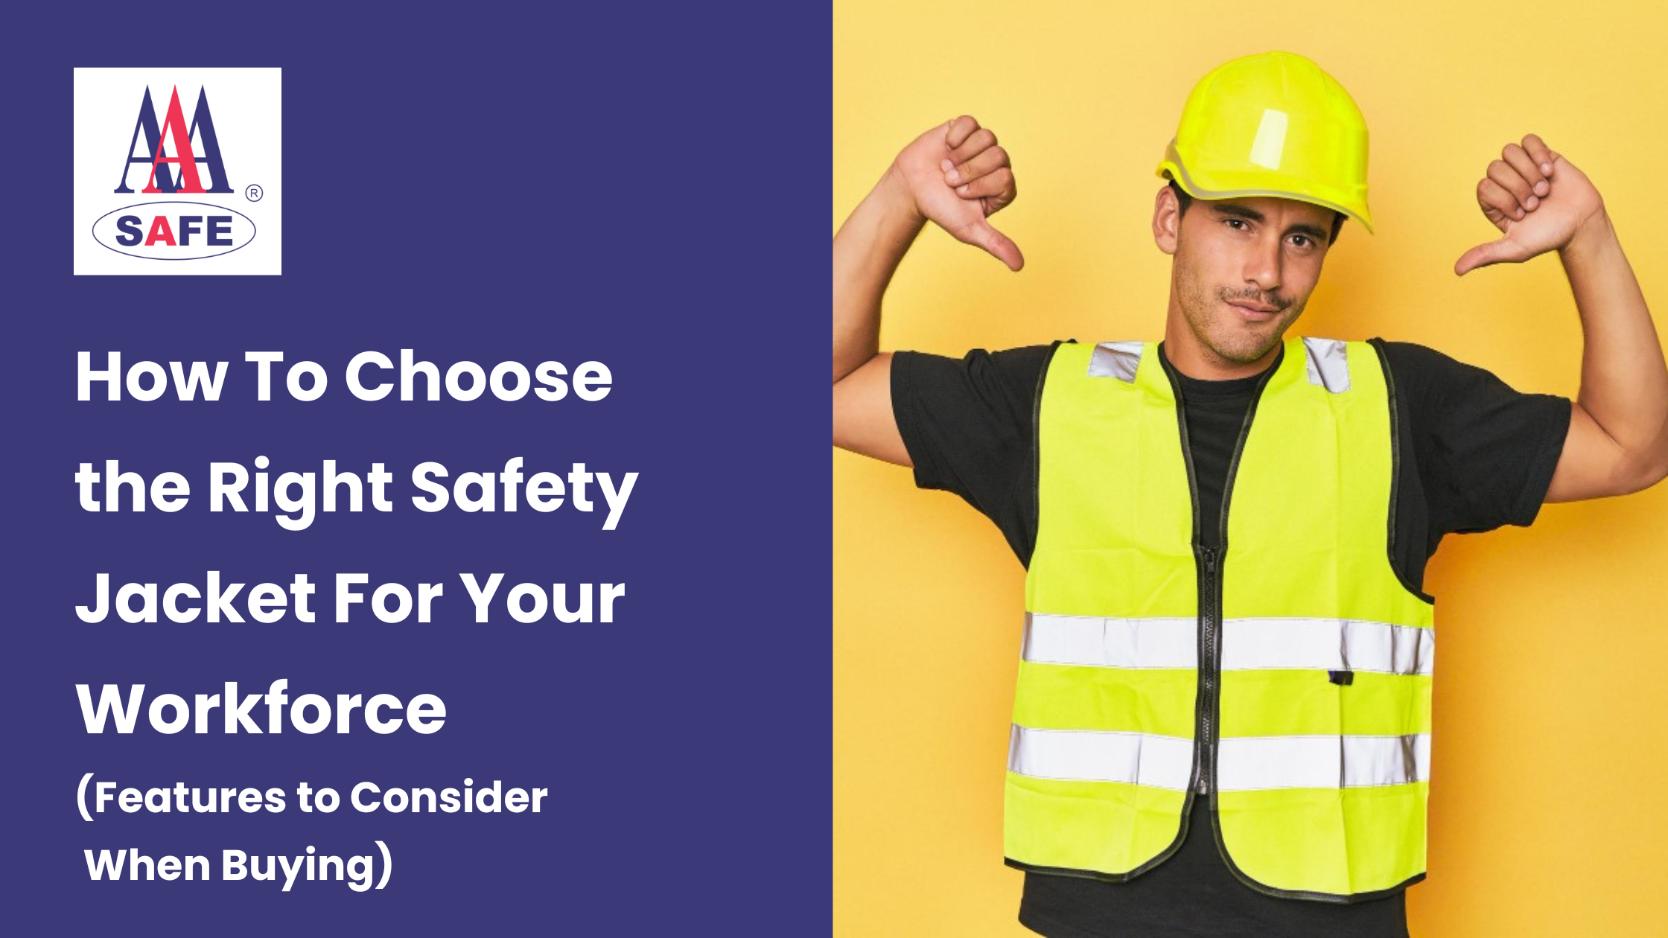 How To Choose the Right Safety Jacket For Your Workforce (Features to Consider When Buying)